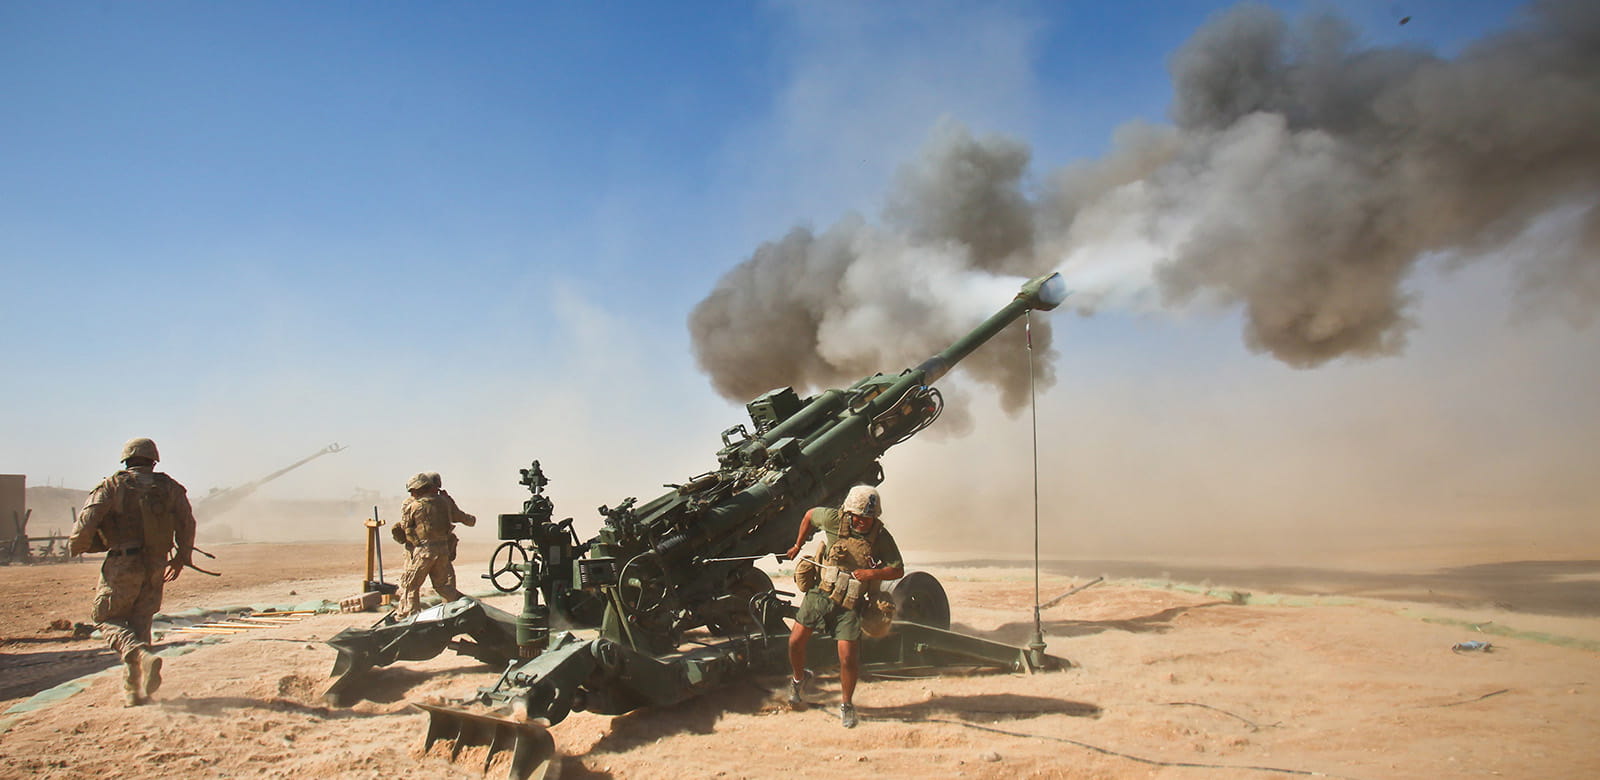 U.S. Marines fire an M982 Excalibur projectile round from an M777 155 mm howitzer during a fire support mission at Fire Base Fiddlers Green, Helmand province. (Photo: U.S. Department of Defense)